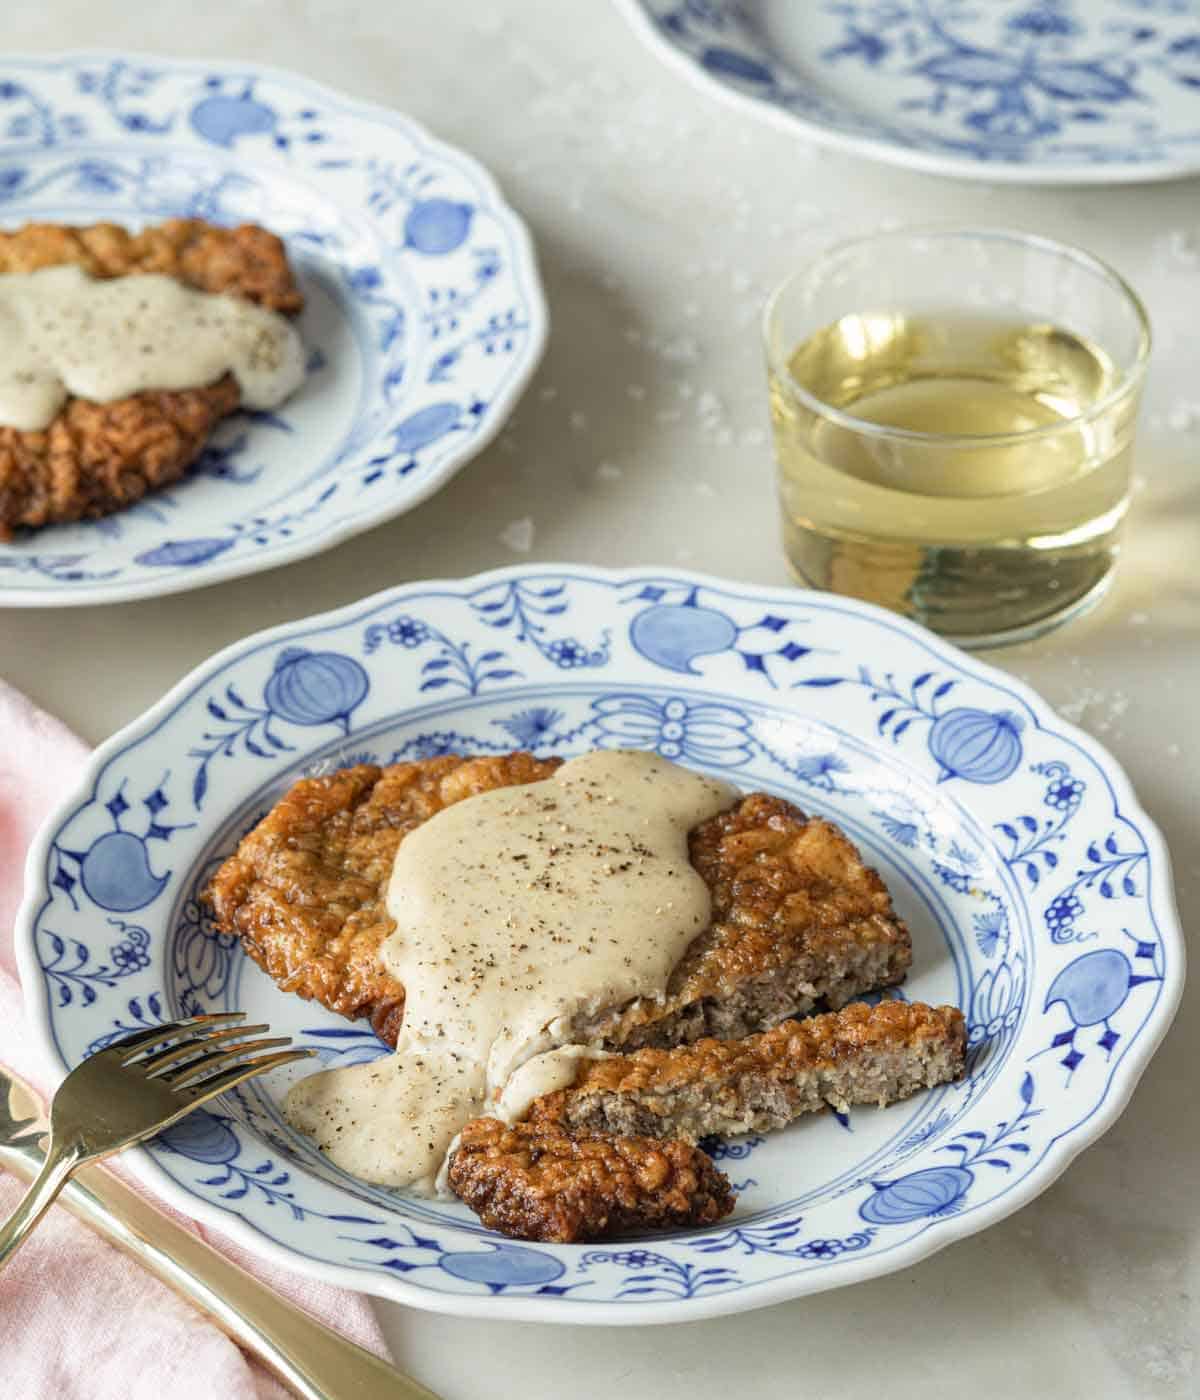 A plate with chicken fried steak sliced, with gravy drizzled on top by a glass of wine.